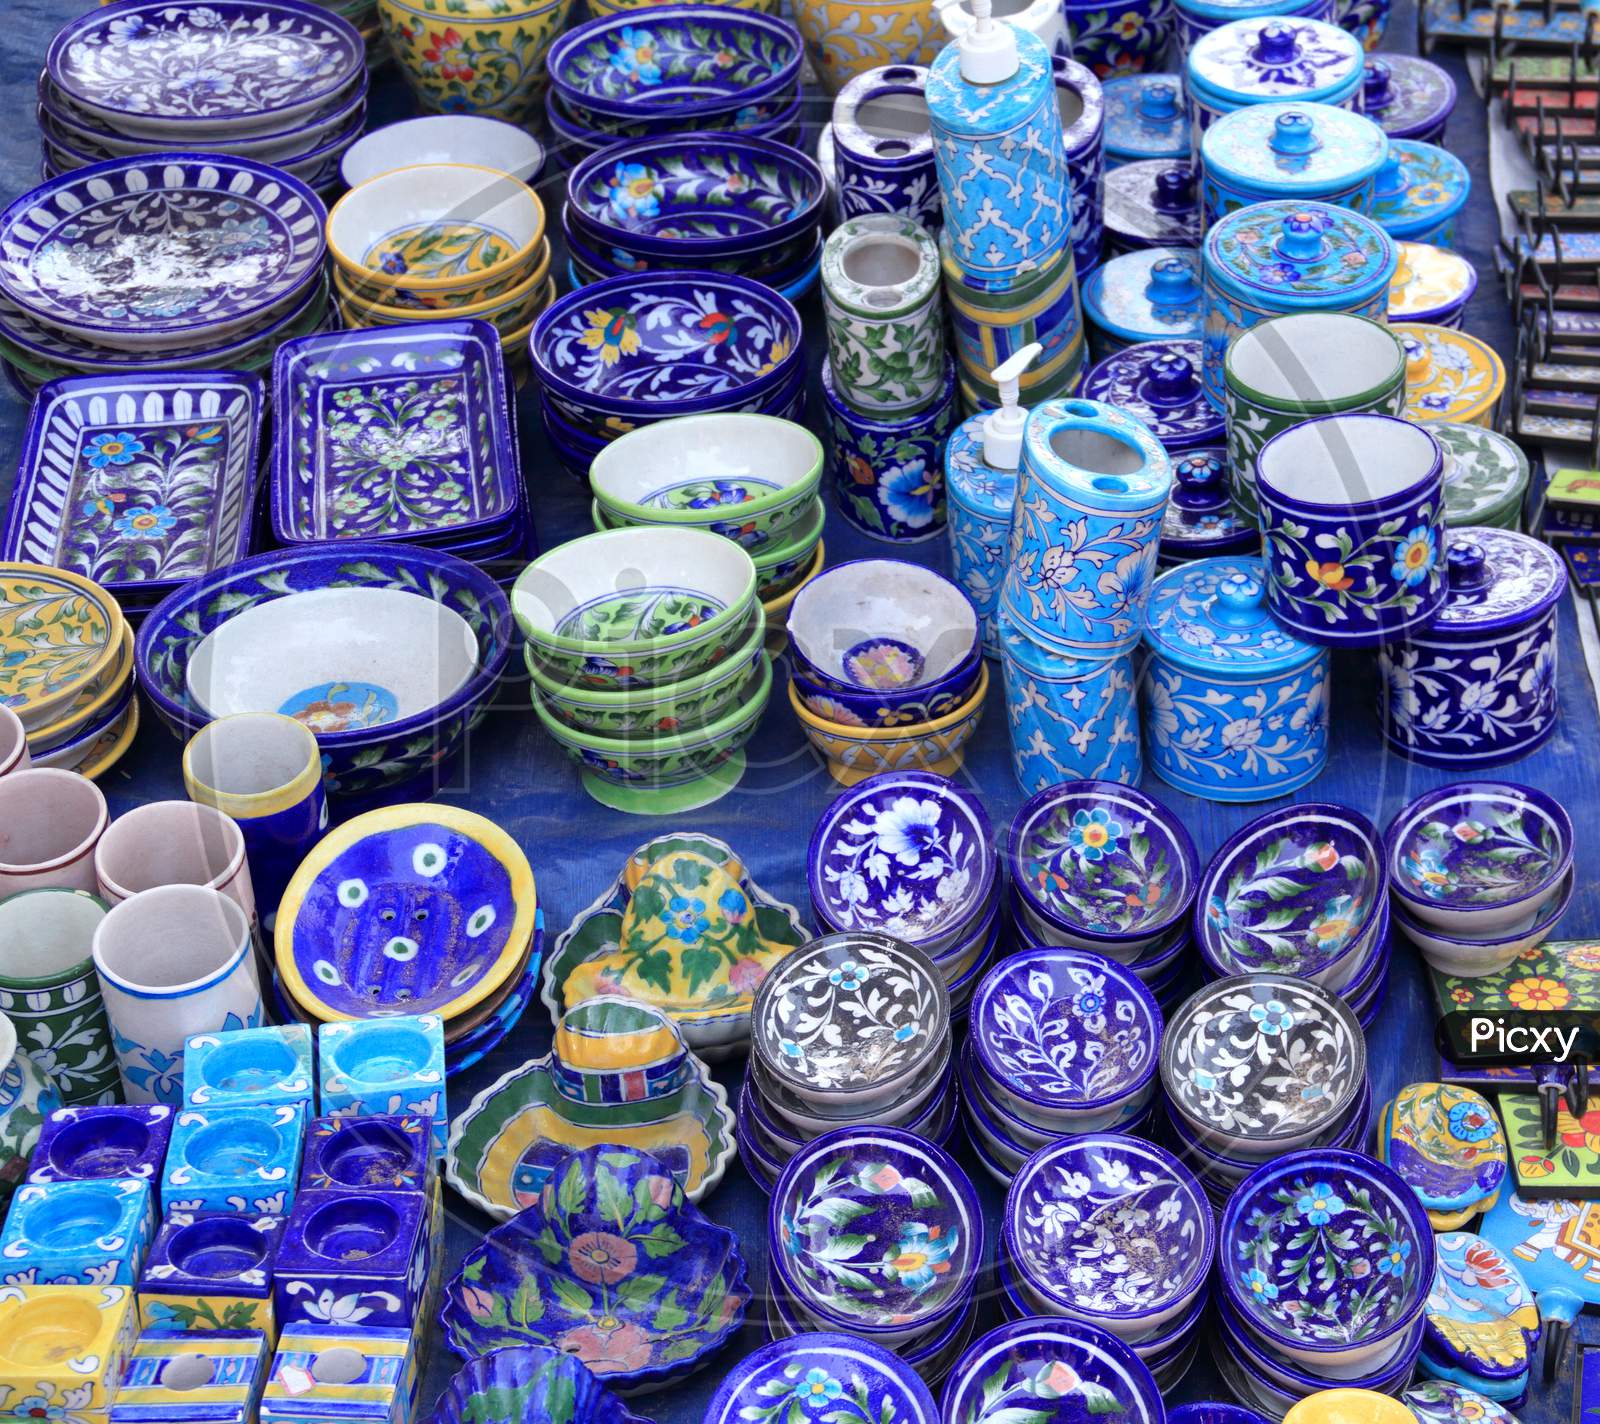 Beautiful Indian Blue Ceramic Items On Display For Sale